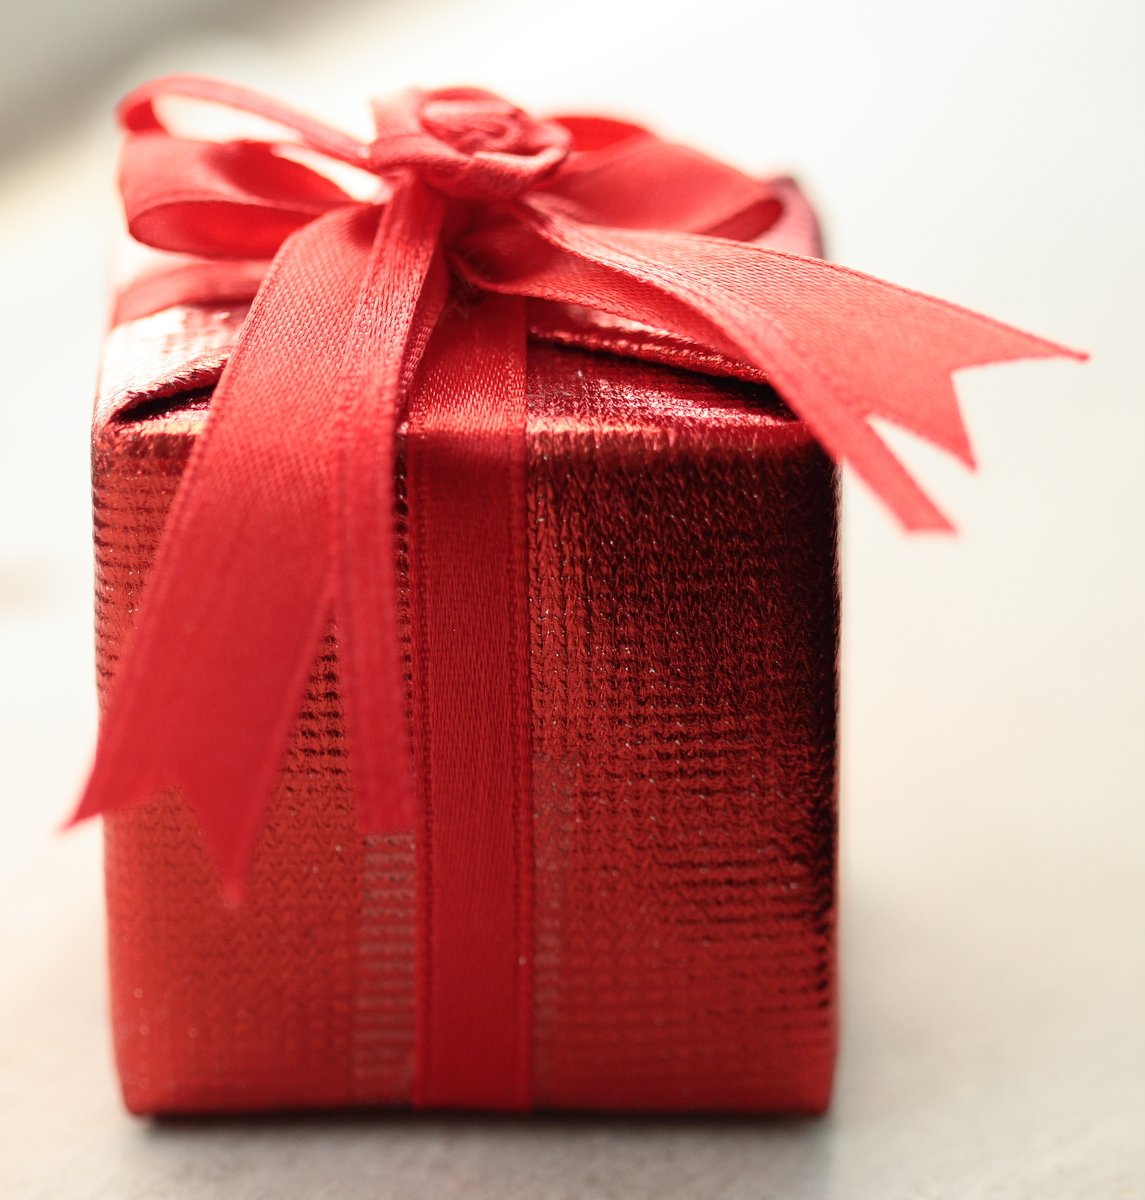 a red present box with a ribbon on it